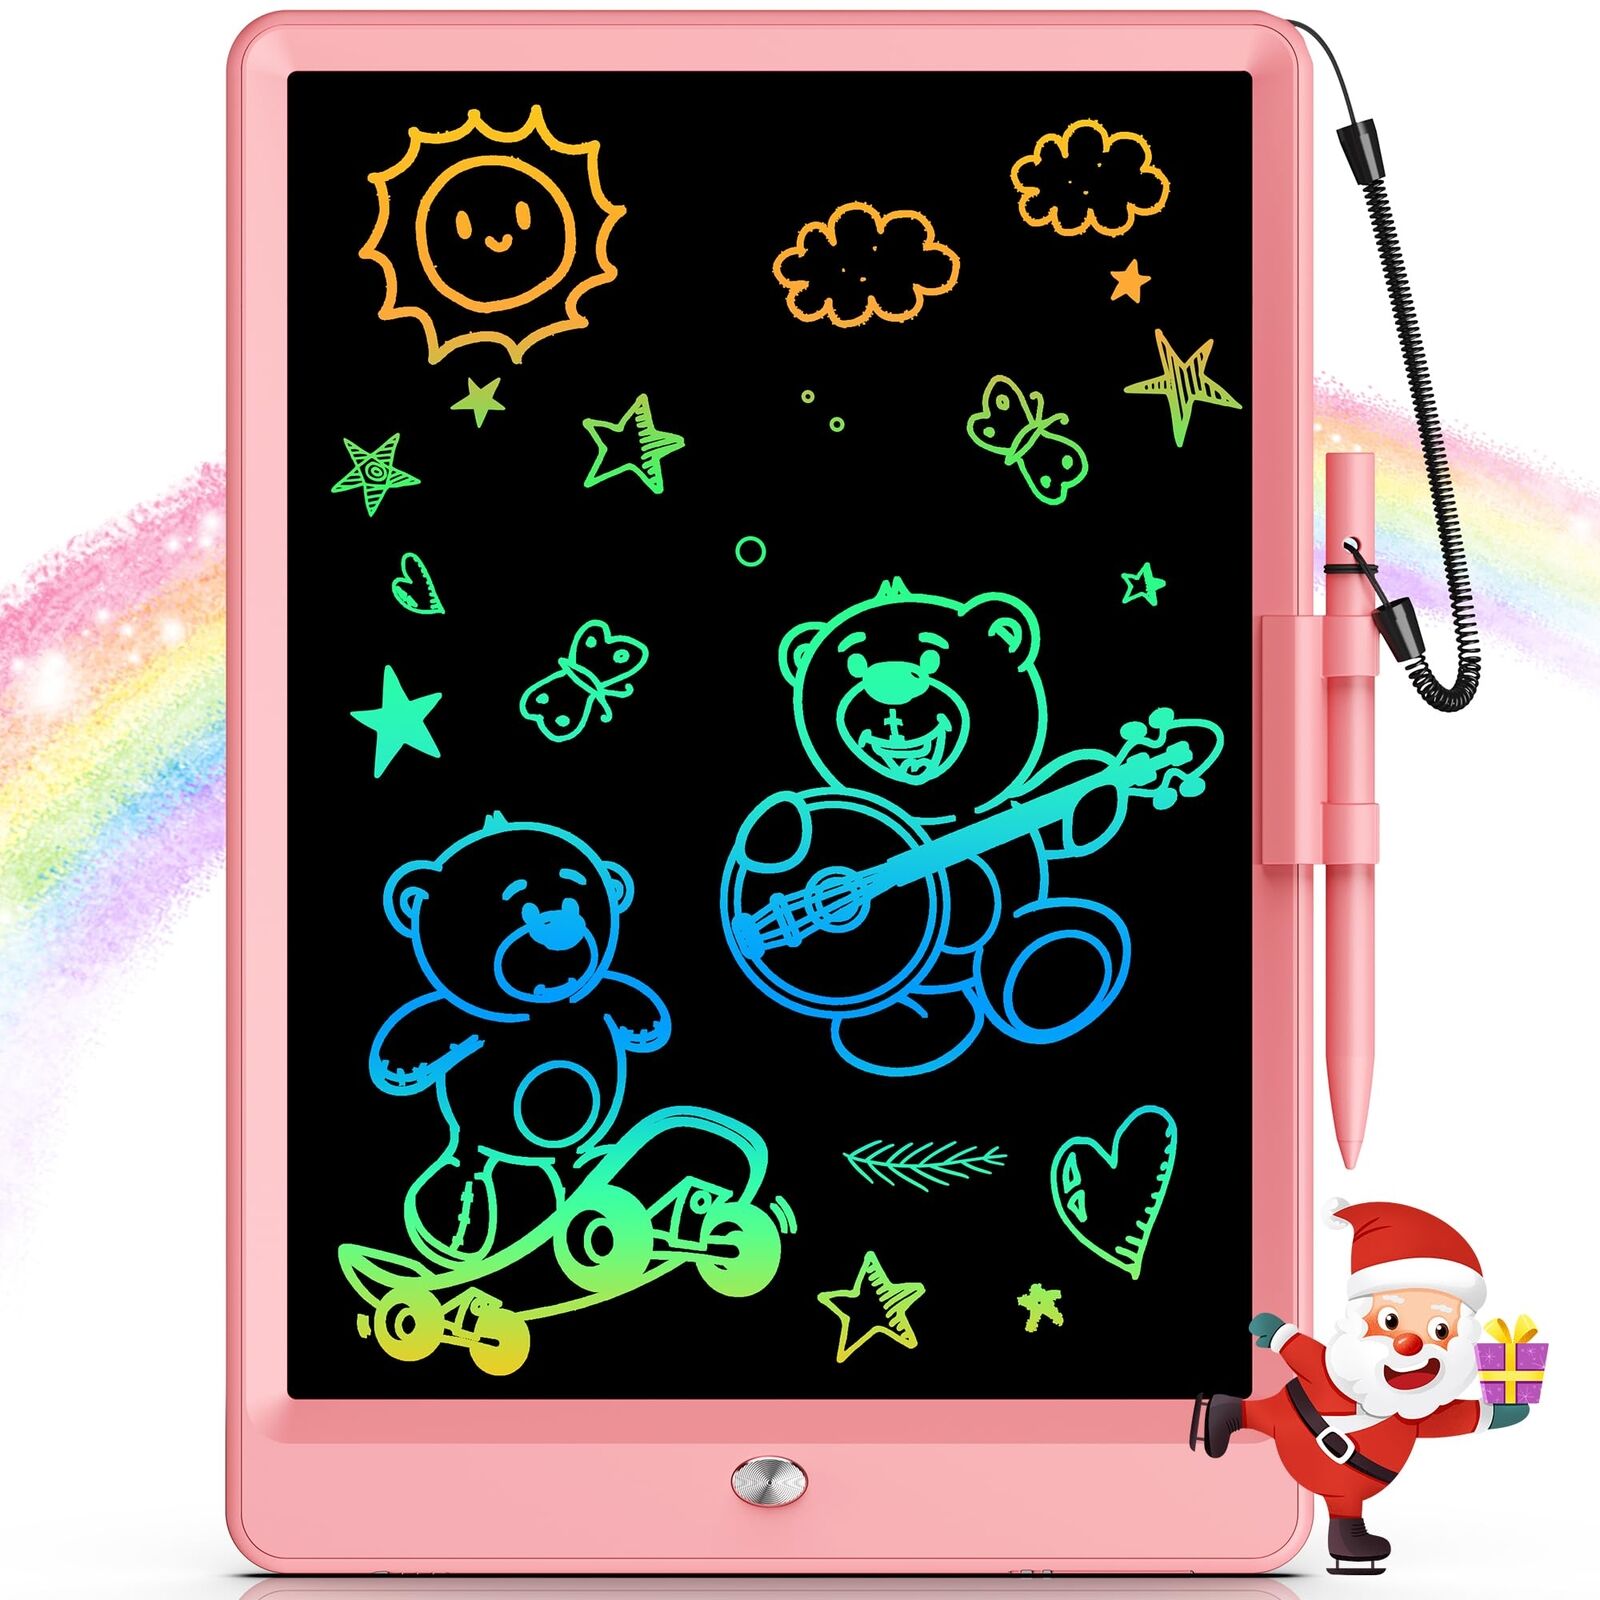 Bravokids 10 Inch LCD Writing Tablet for 3-8 Year Olds - Electronic Drawing P...